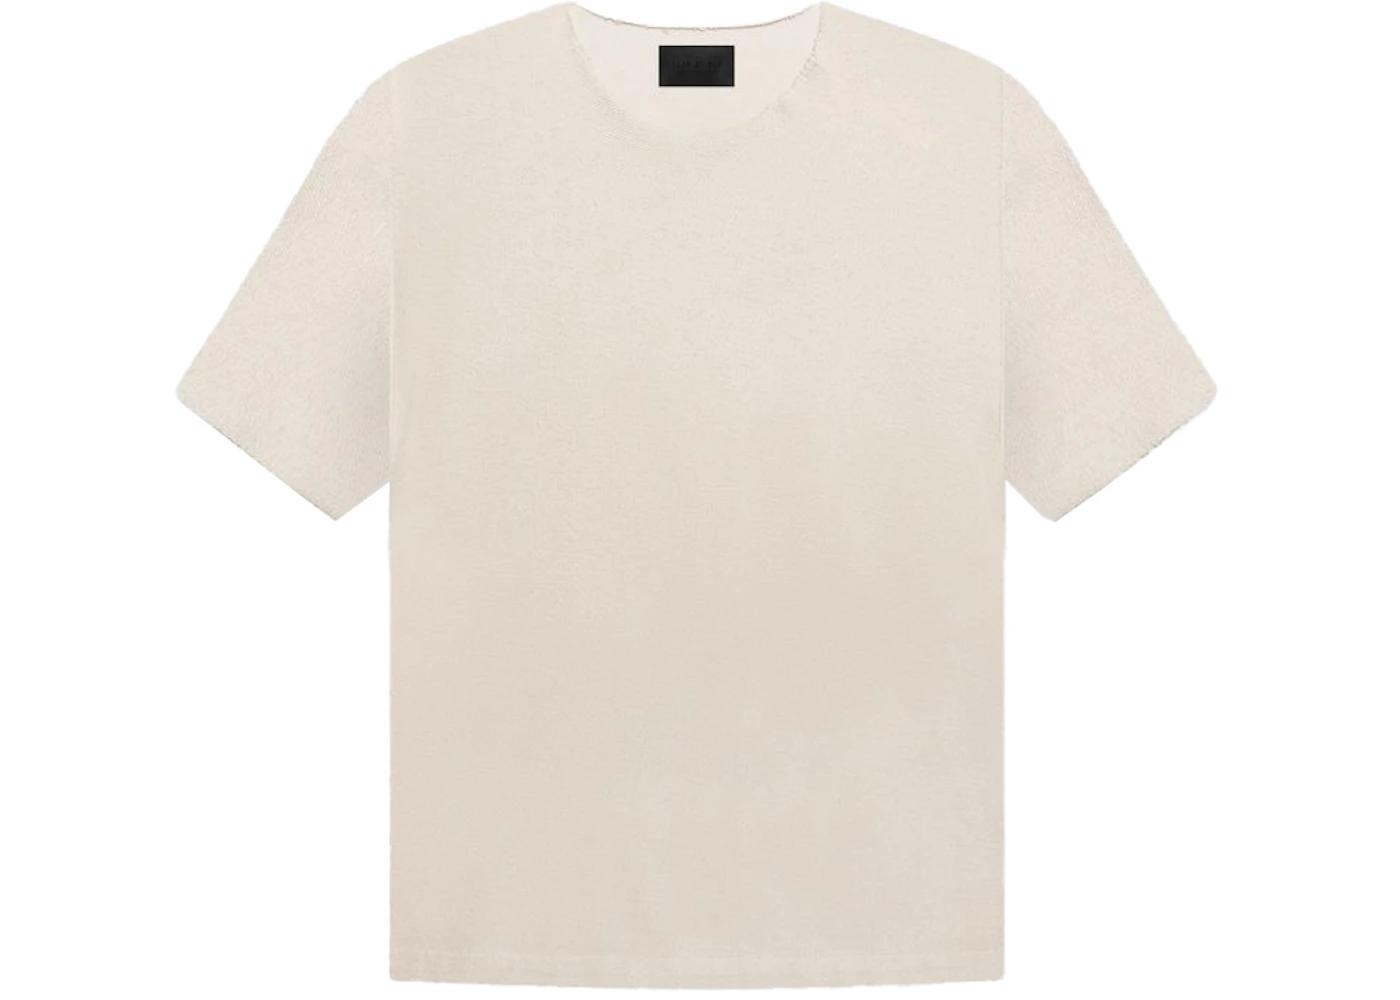 Fear of God Inside Out Terry Tee Concrete White Men's - SEVENTH ...